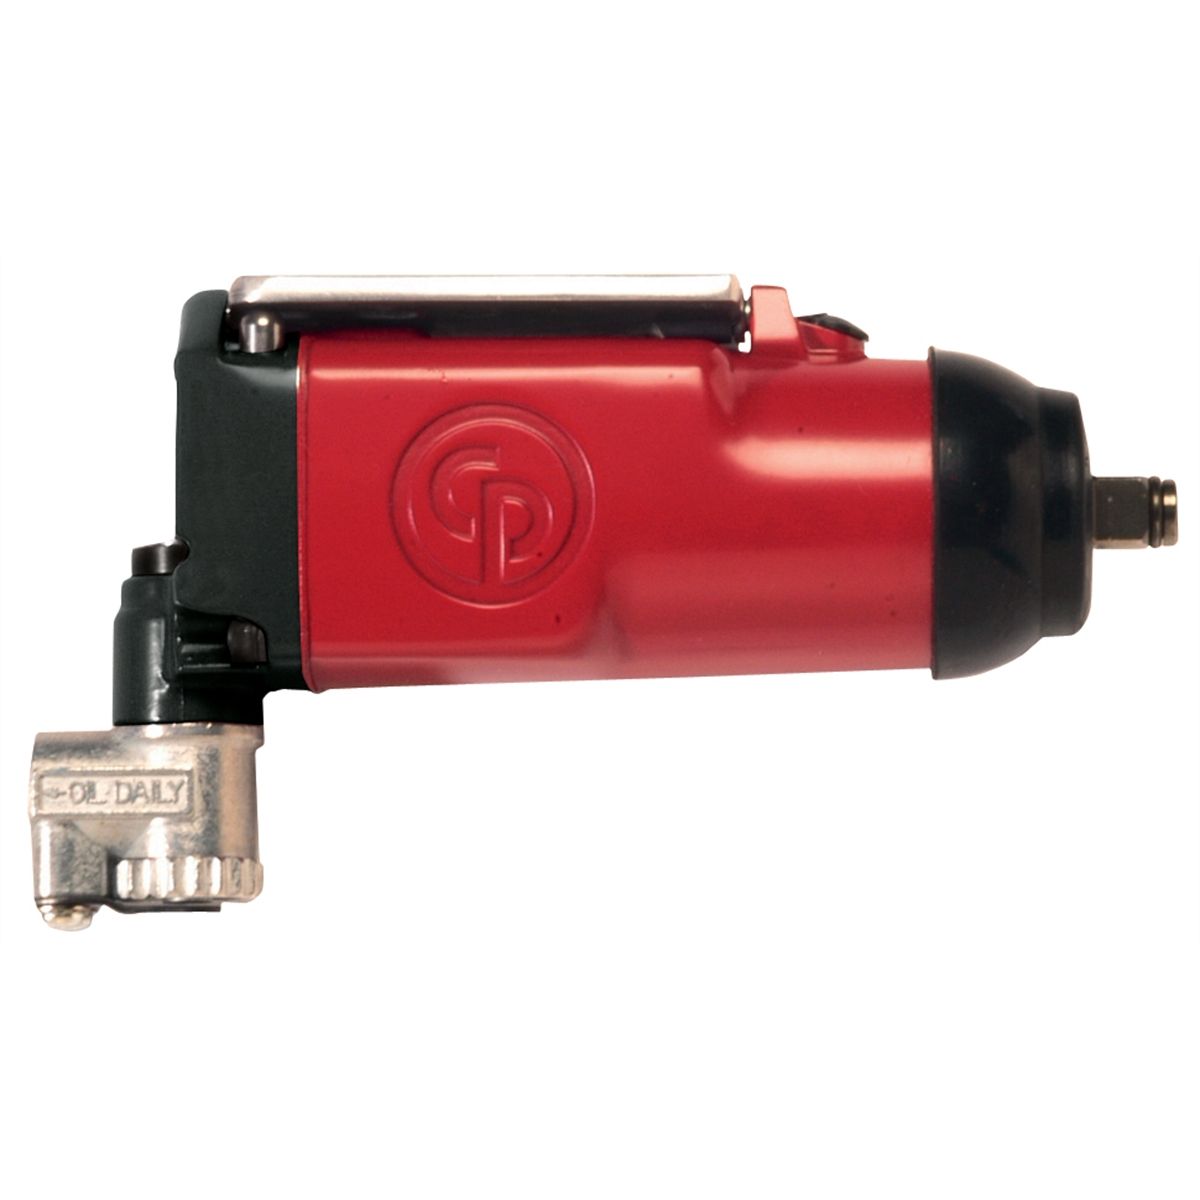 Astro 136E 3//8 Drive Butterfly Impact Wrench